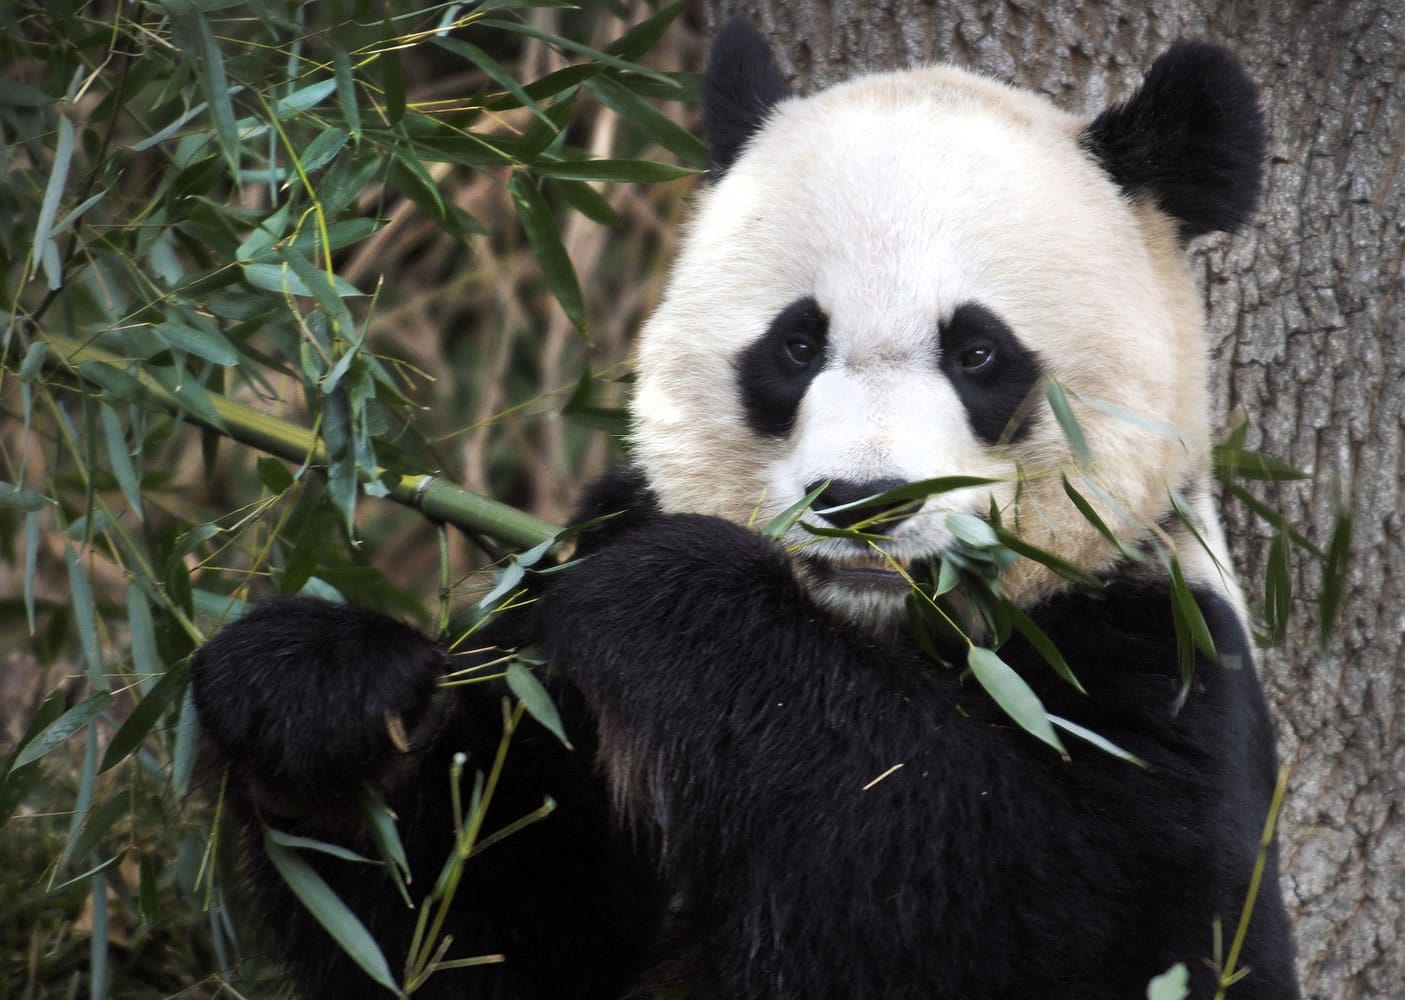 Associated Press files
Mei Xiang, the female giant panda at the Smithsonian's National Zoo in Washington, is pregnant again, officials believe. Her last cub, Bao Bao, was born in 2013.